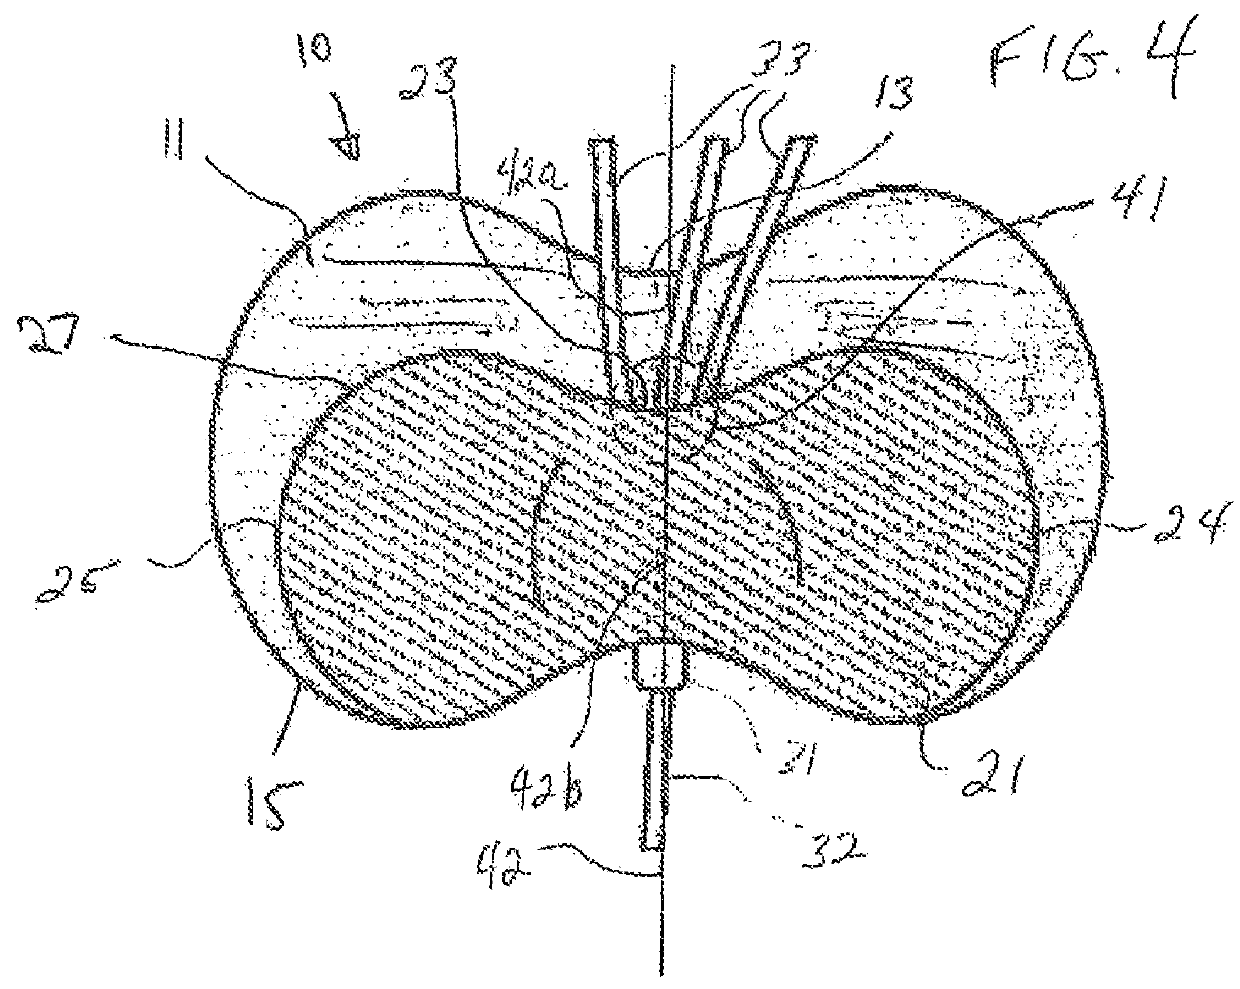 Offset catheter securement device